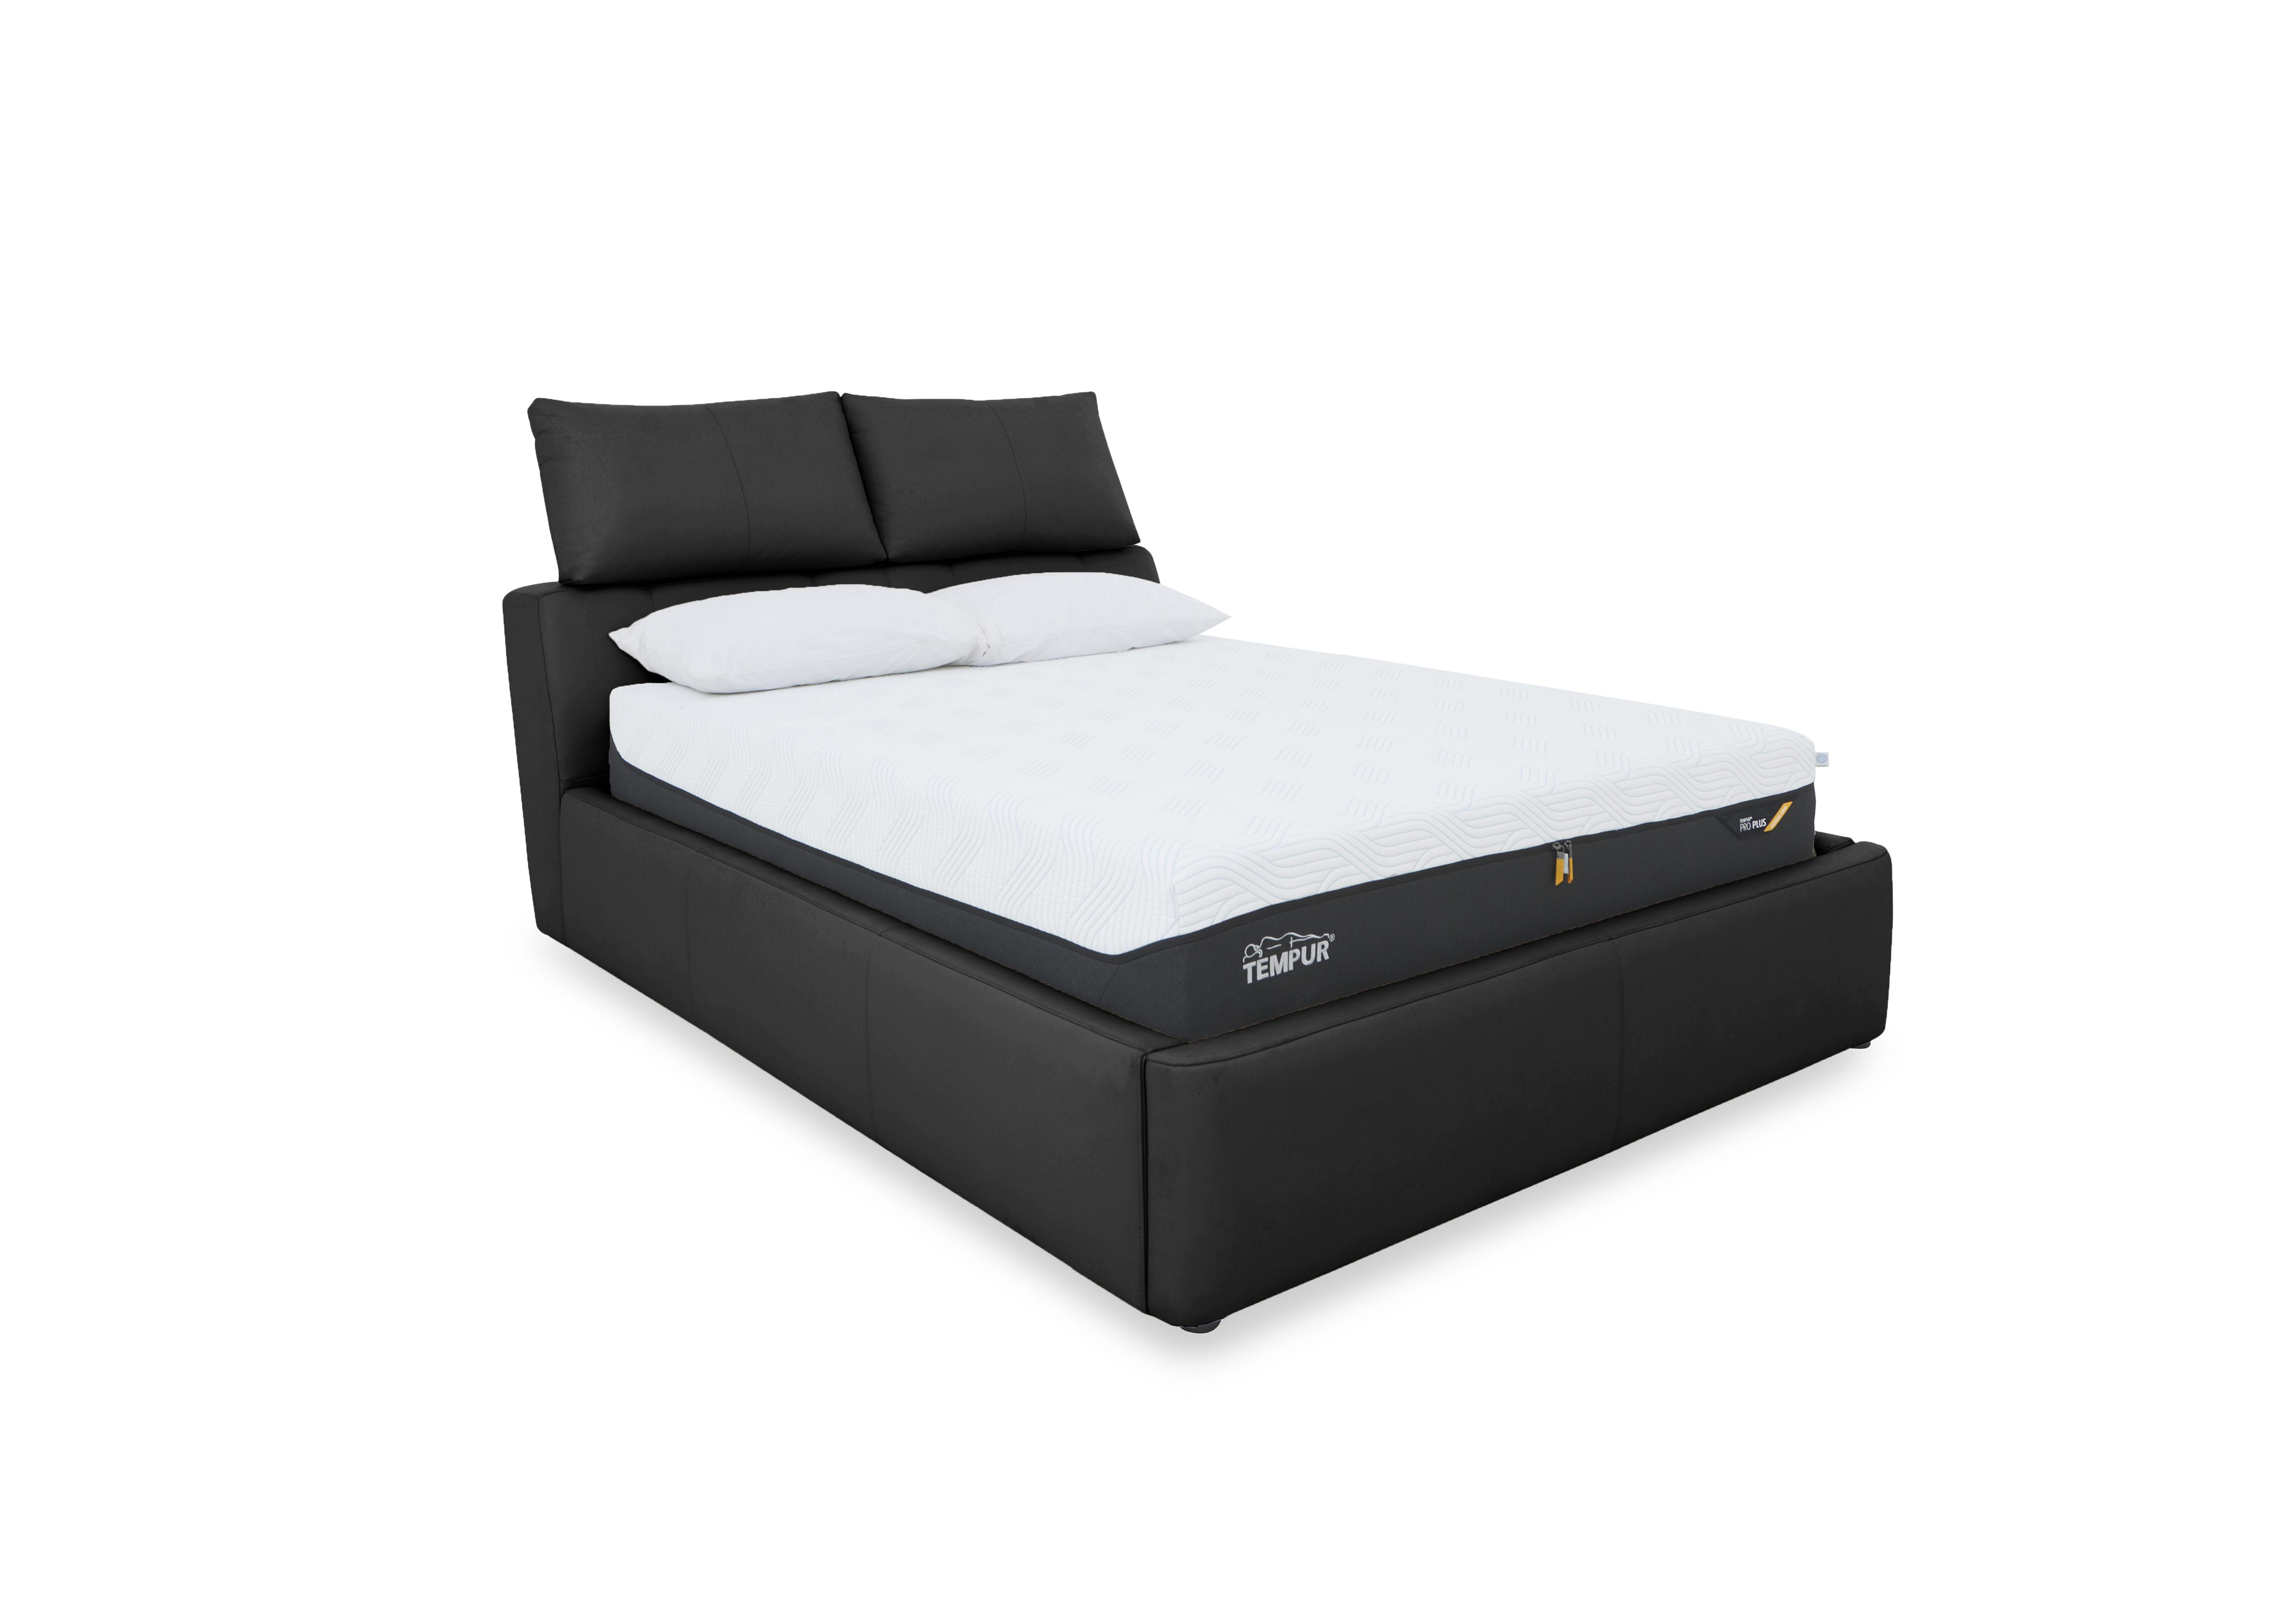 Tyrell Leather Manual Ottoman Bed Frame in Bv-3500 Classic Black on Furniture Village